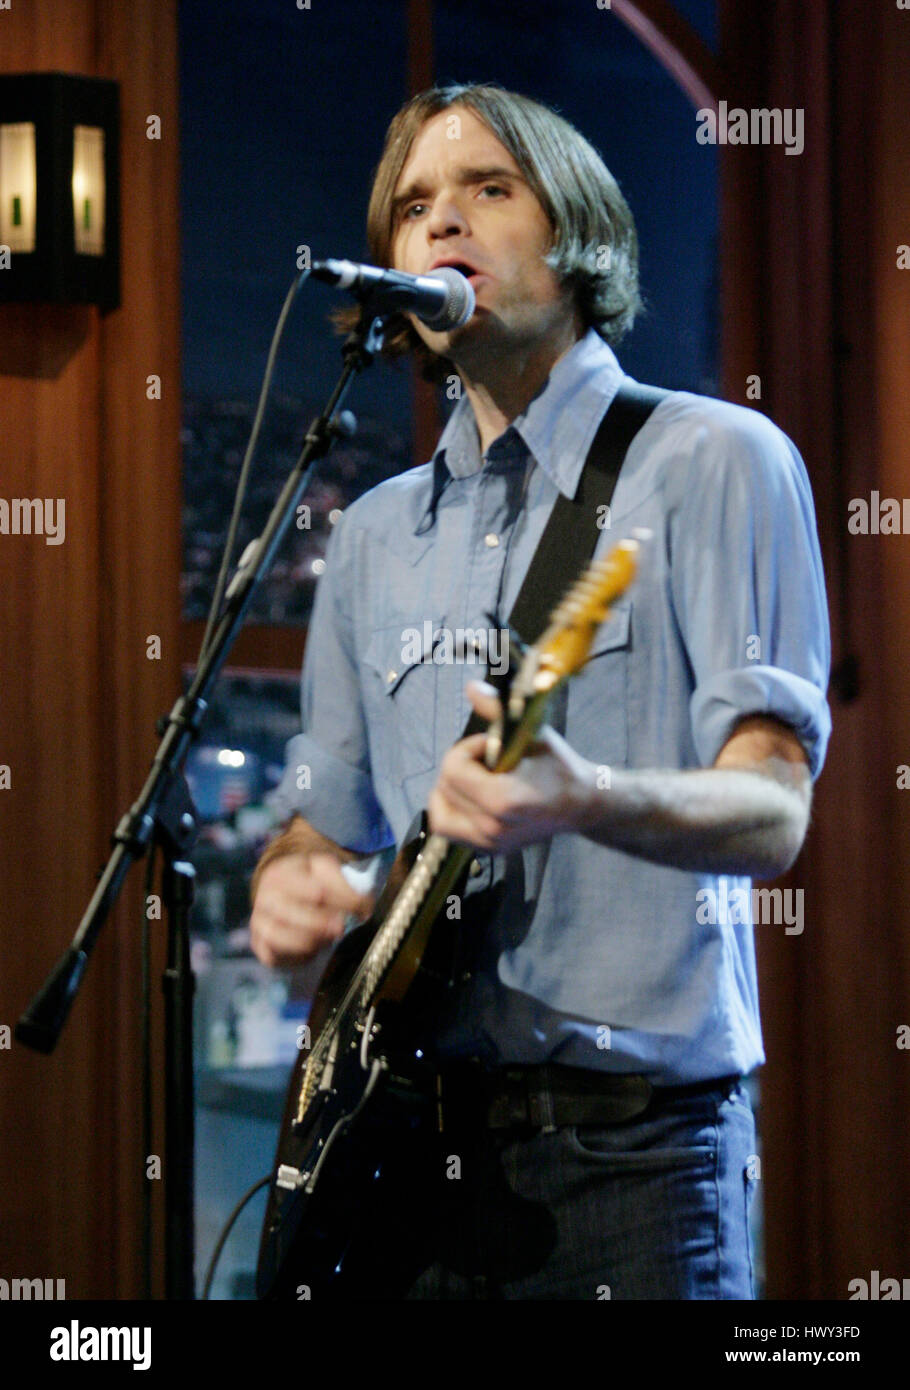 The band, 'Death Cab For Cutie',  with Ben Gibbard on lead vocals performs during a segment of 'The Late Late Show with Craig Ferguson' at CBS Television City in Los Angeles on Friday, Dec. 12, 2008. Photo by Francis Specker Stock Photo